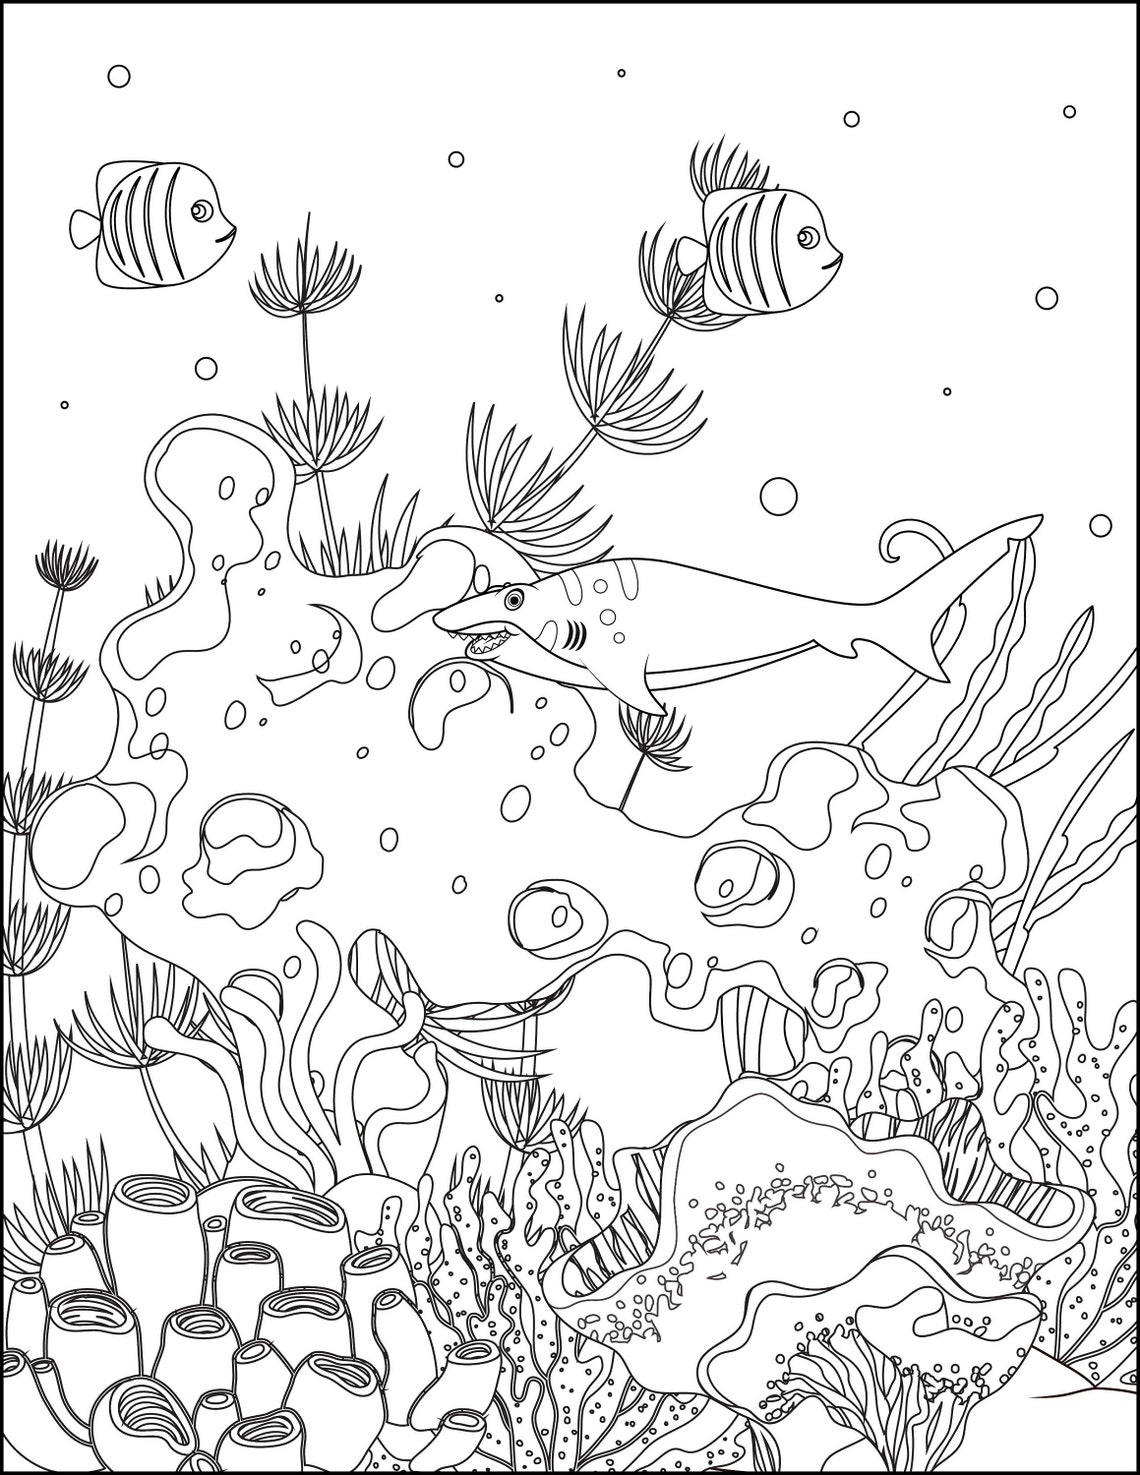 20 Ocean Coloring Pages - Etsy